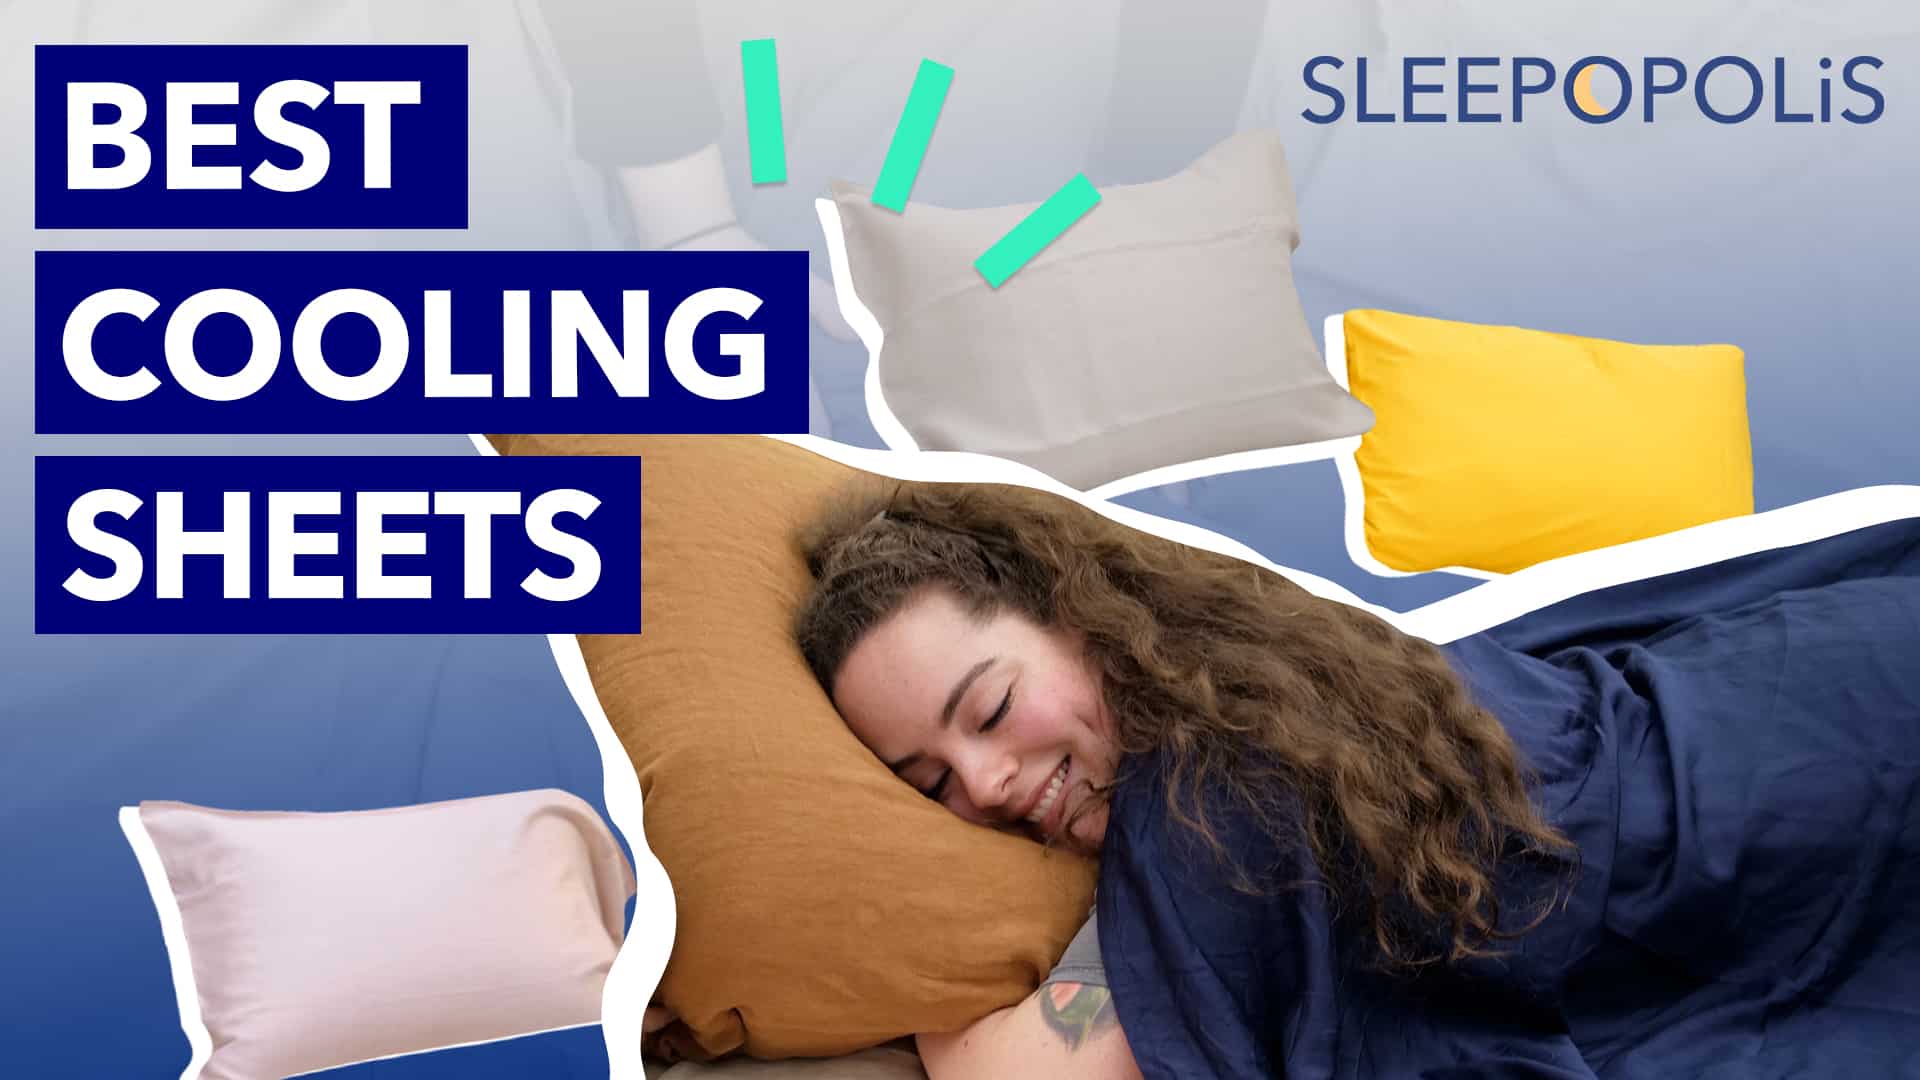 Best Cooling Sheets (2020) Full Guide and Review Sleepopolis